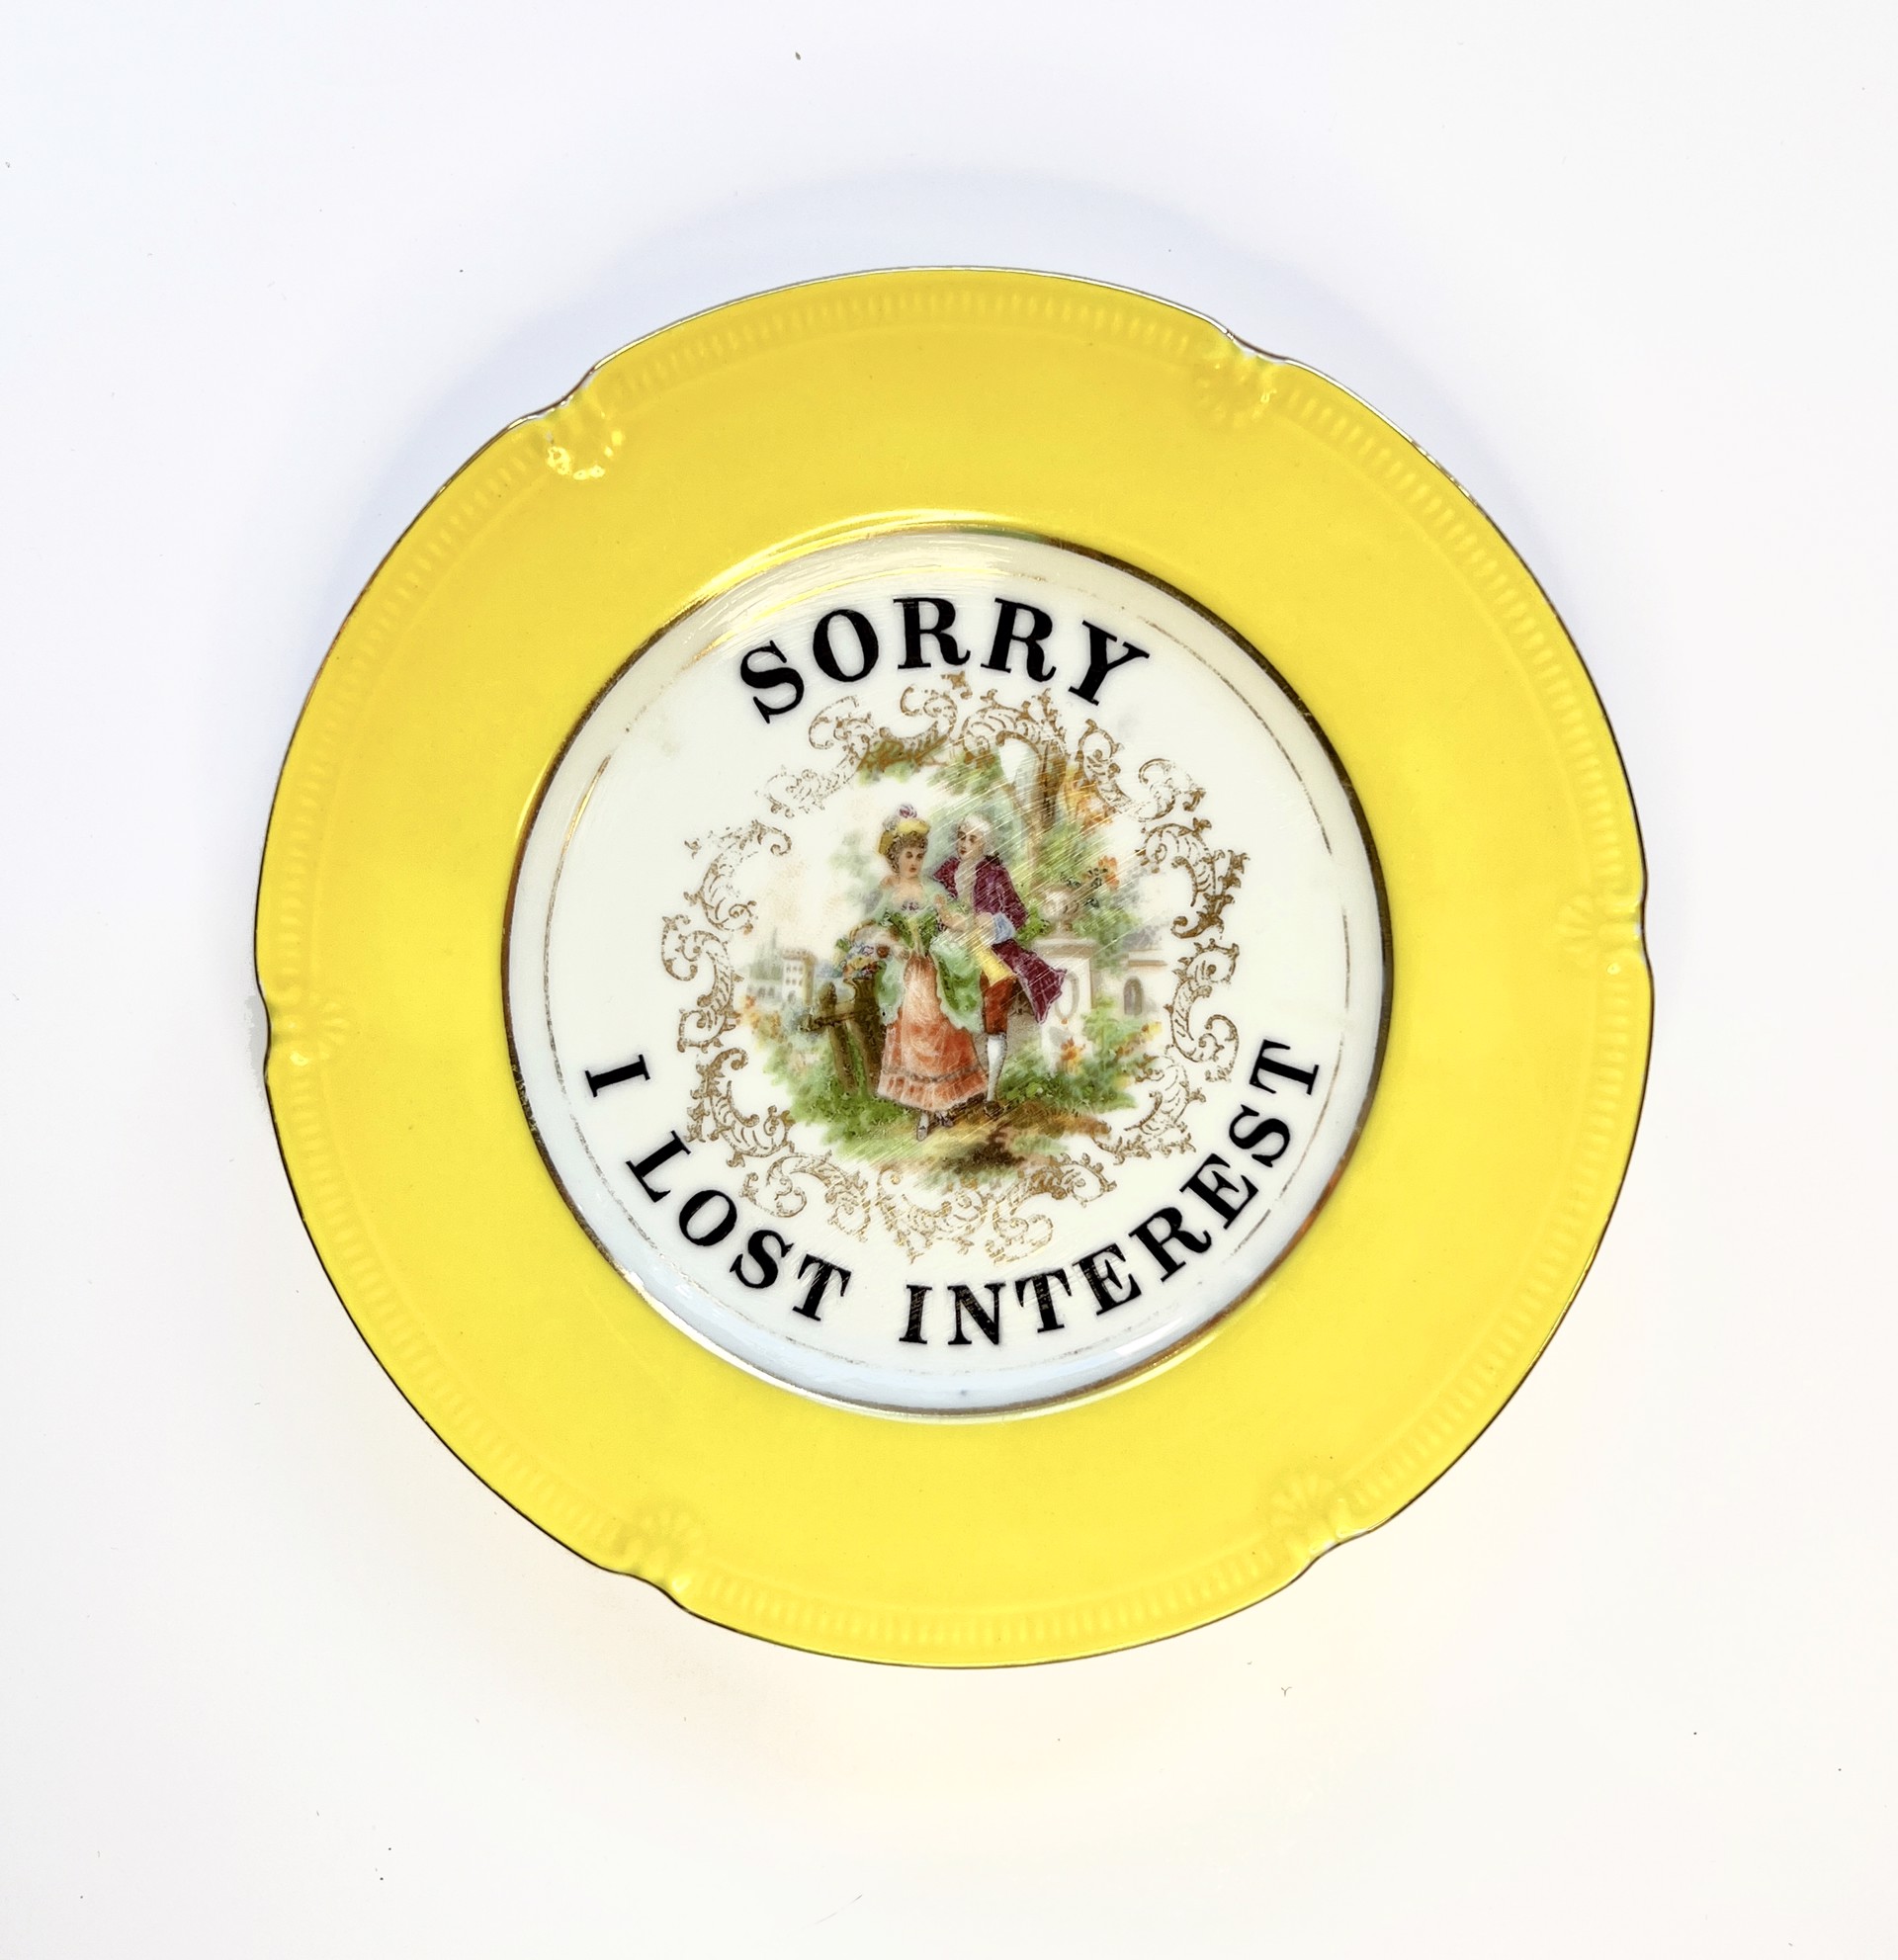 Sorry I lost interest (dessert plate) by Marie-Claude Marquis